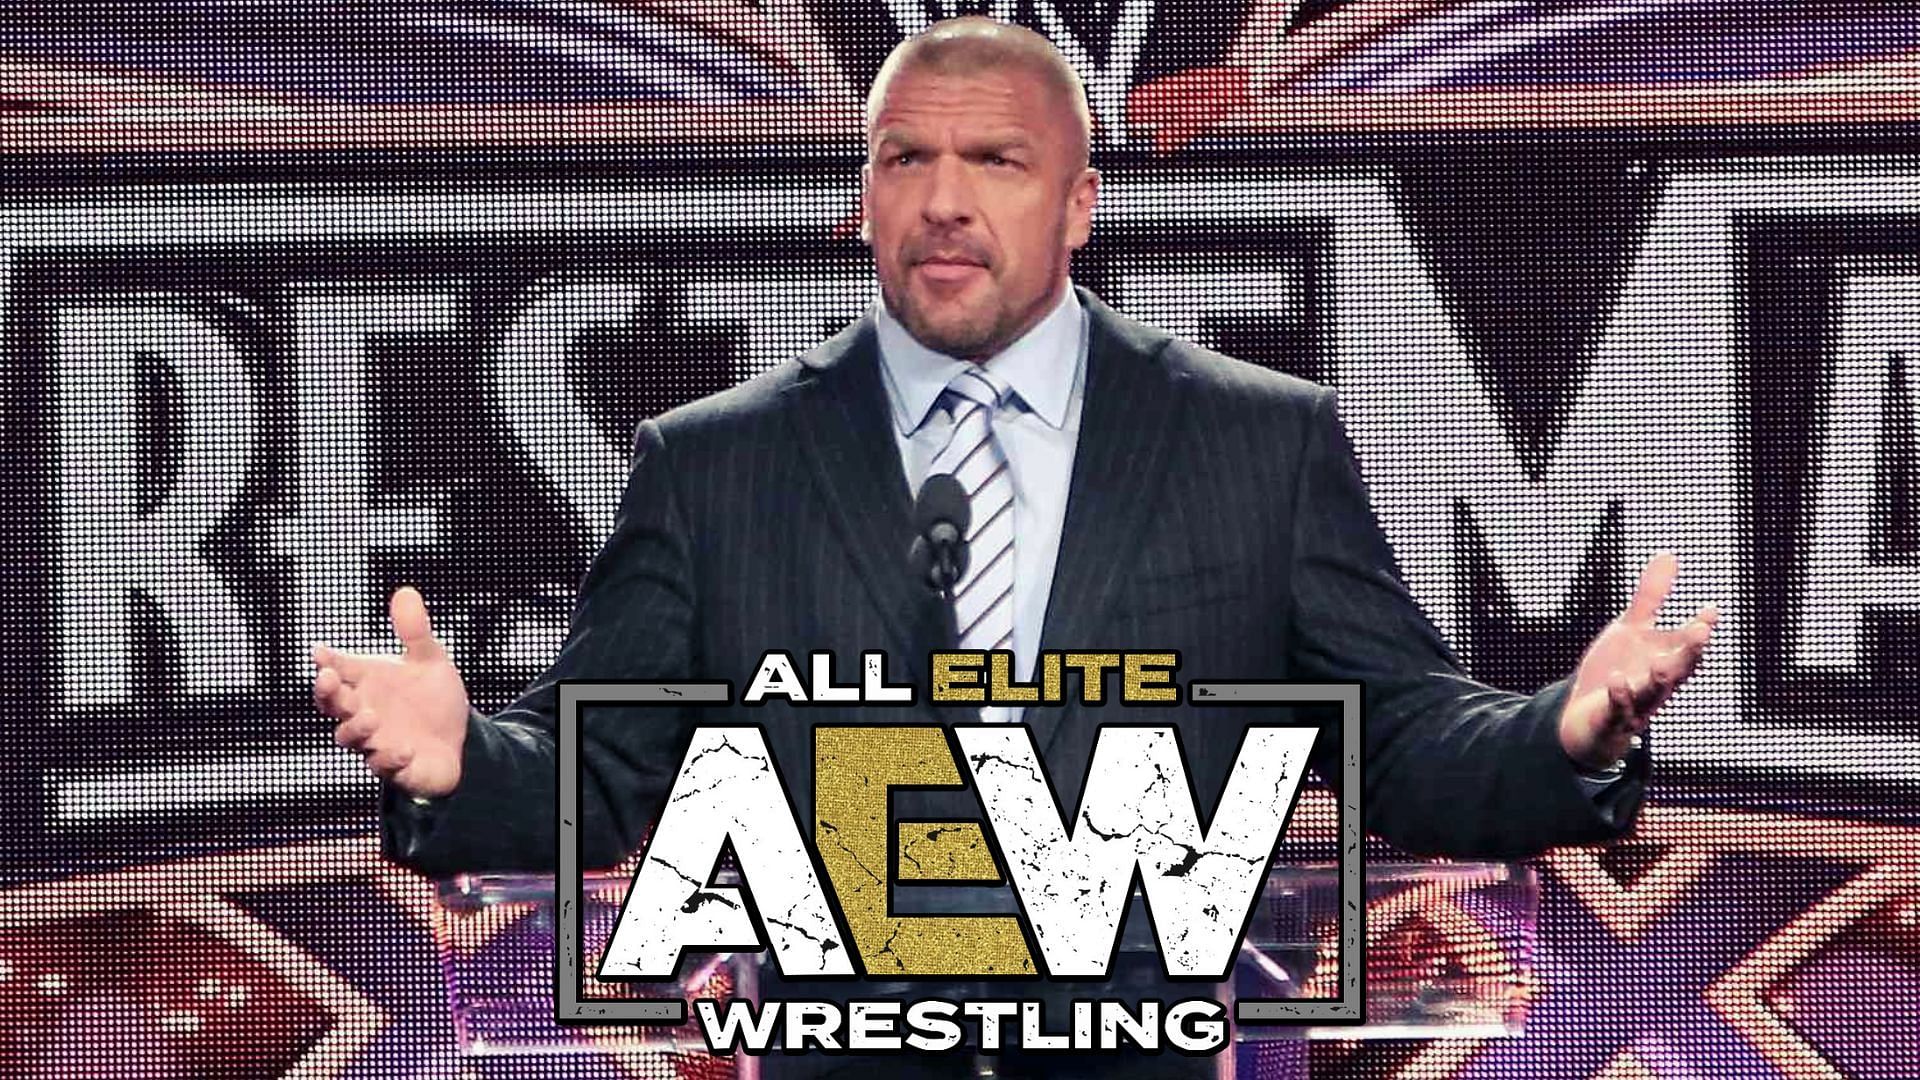 Has Triple H enticed this star enough to return to WWE?